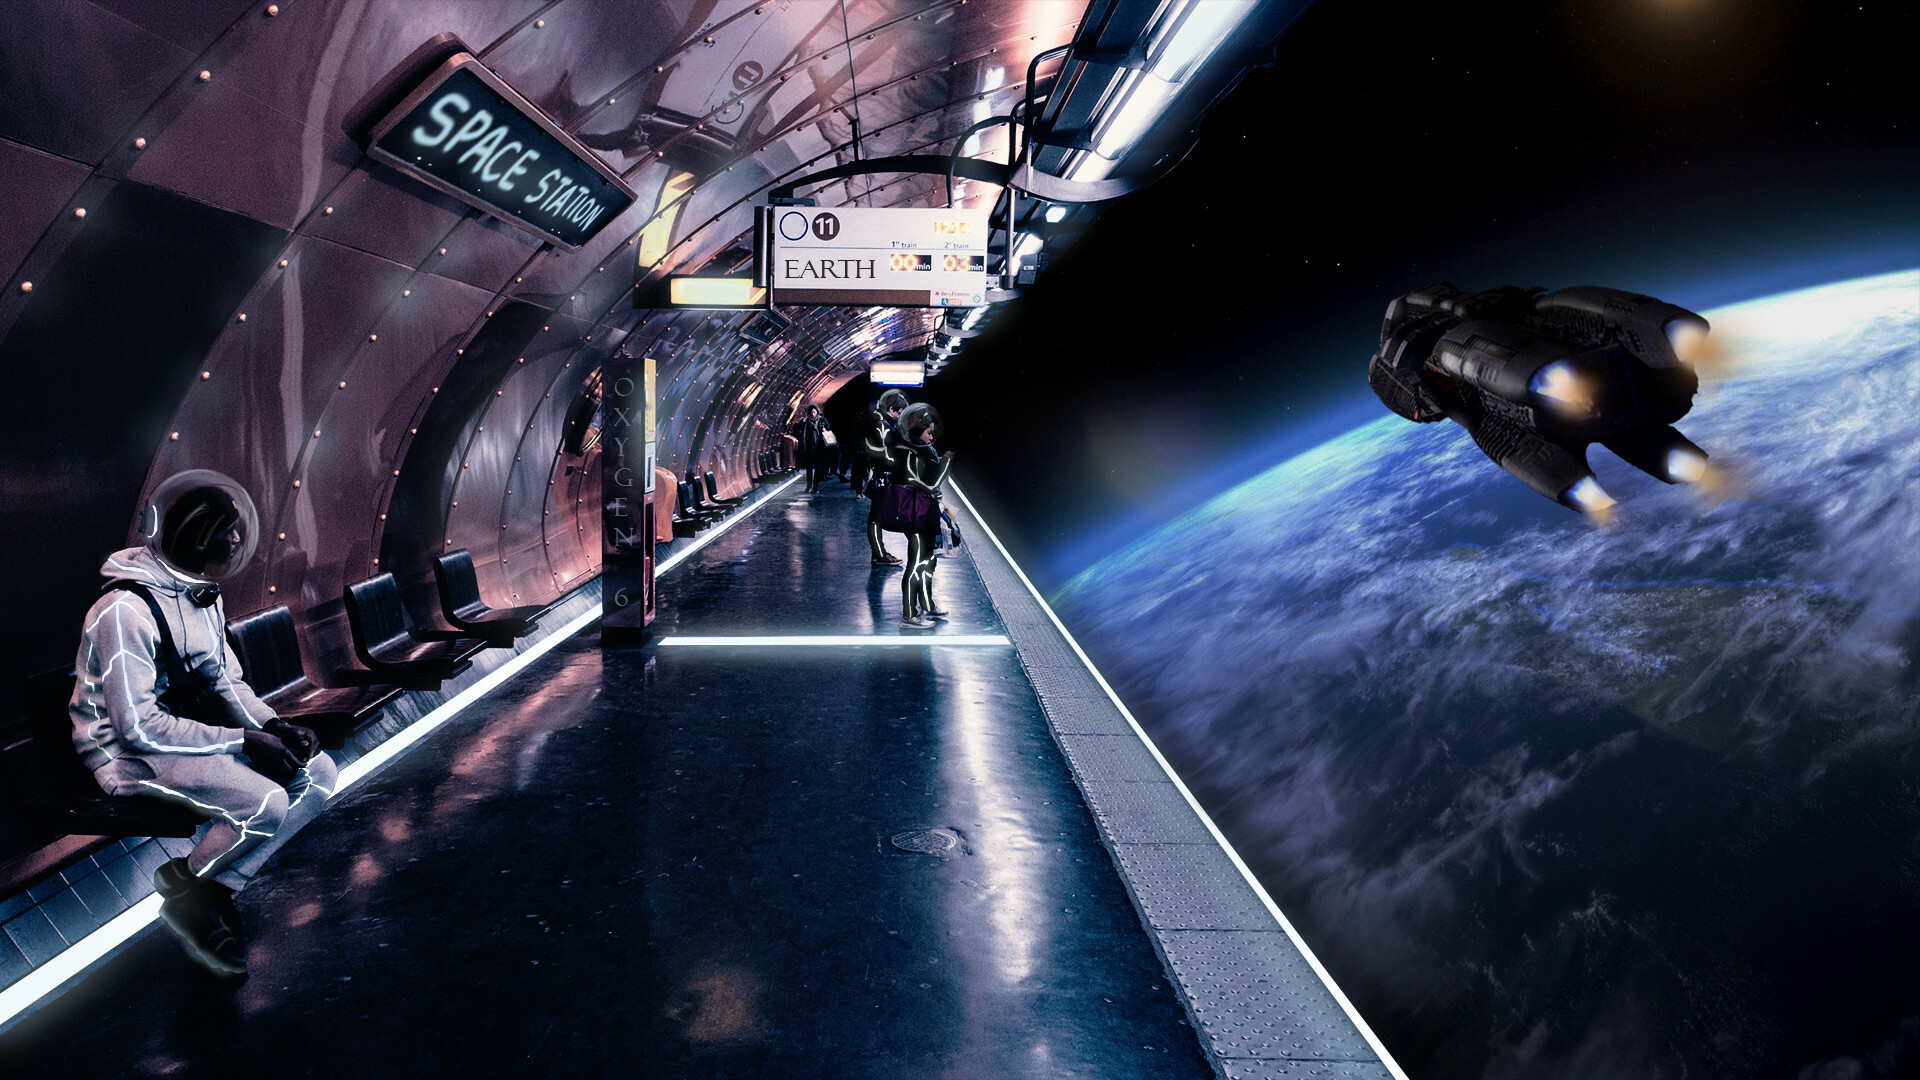 Space Tourism: Science fiction, Travel through the galaxy, Interstellar trip. 1920x1080 Full HD Background.